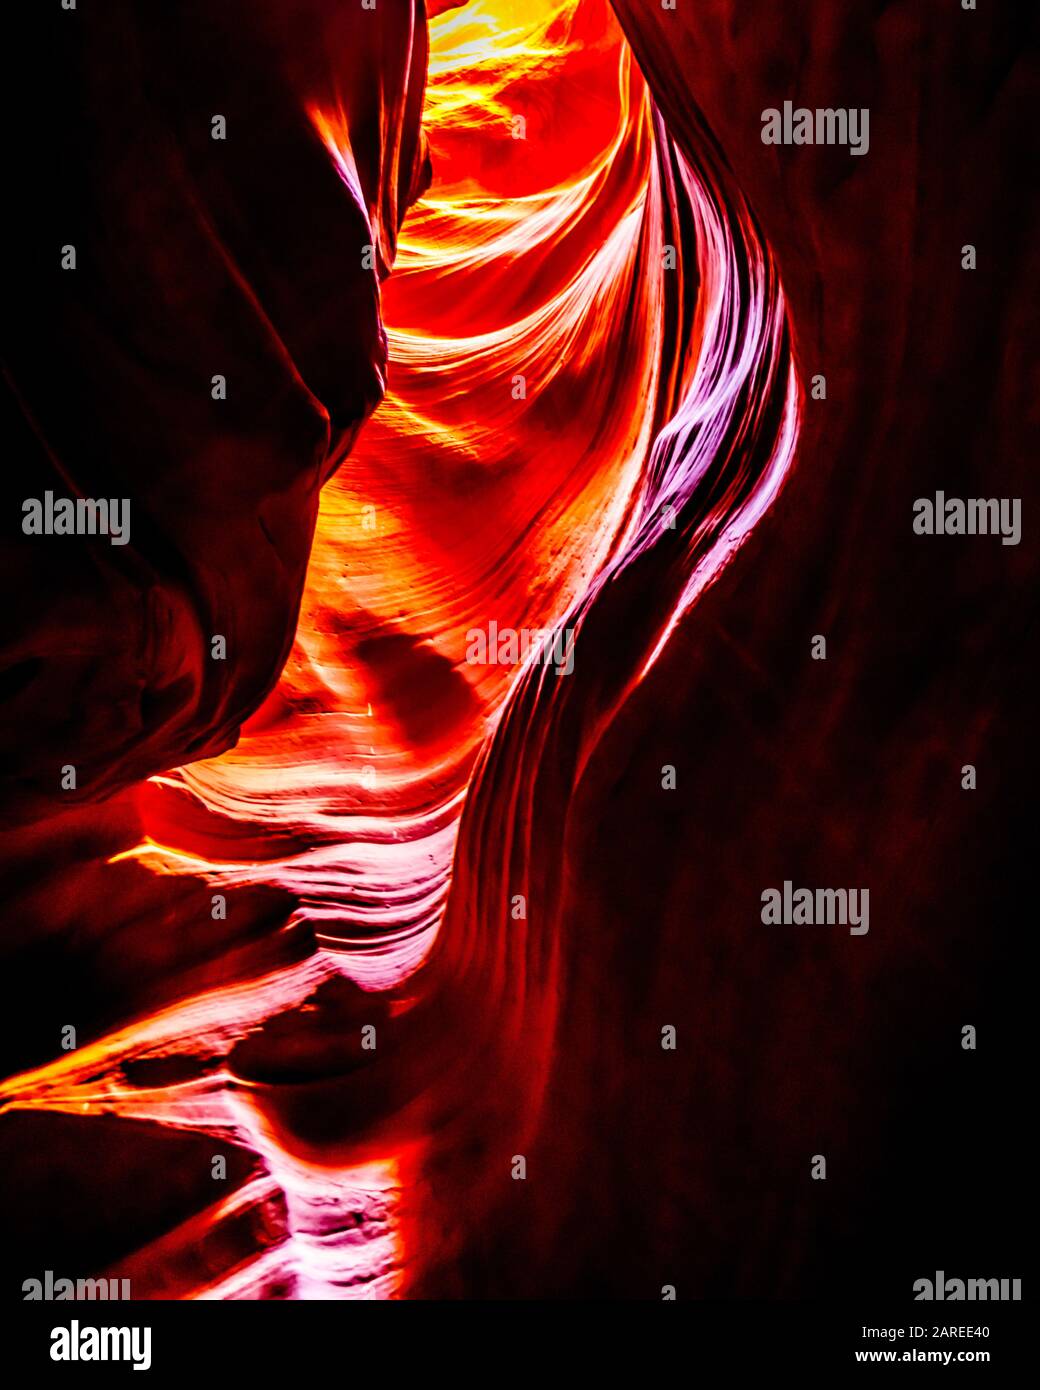 The smooth curved Red Navajo Sandstone walls of the Upper Antelope Canyon, one of the famous Slot Canyons in the Navajo lands near Page Arizona, USA Stock Photo